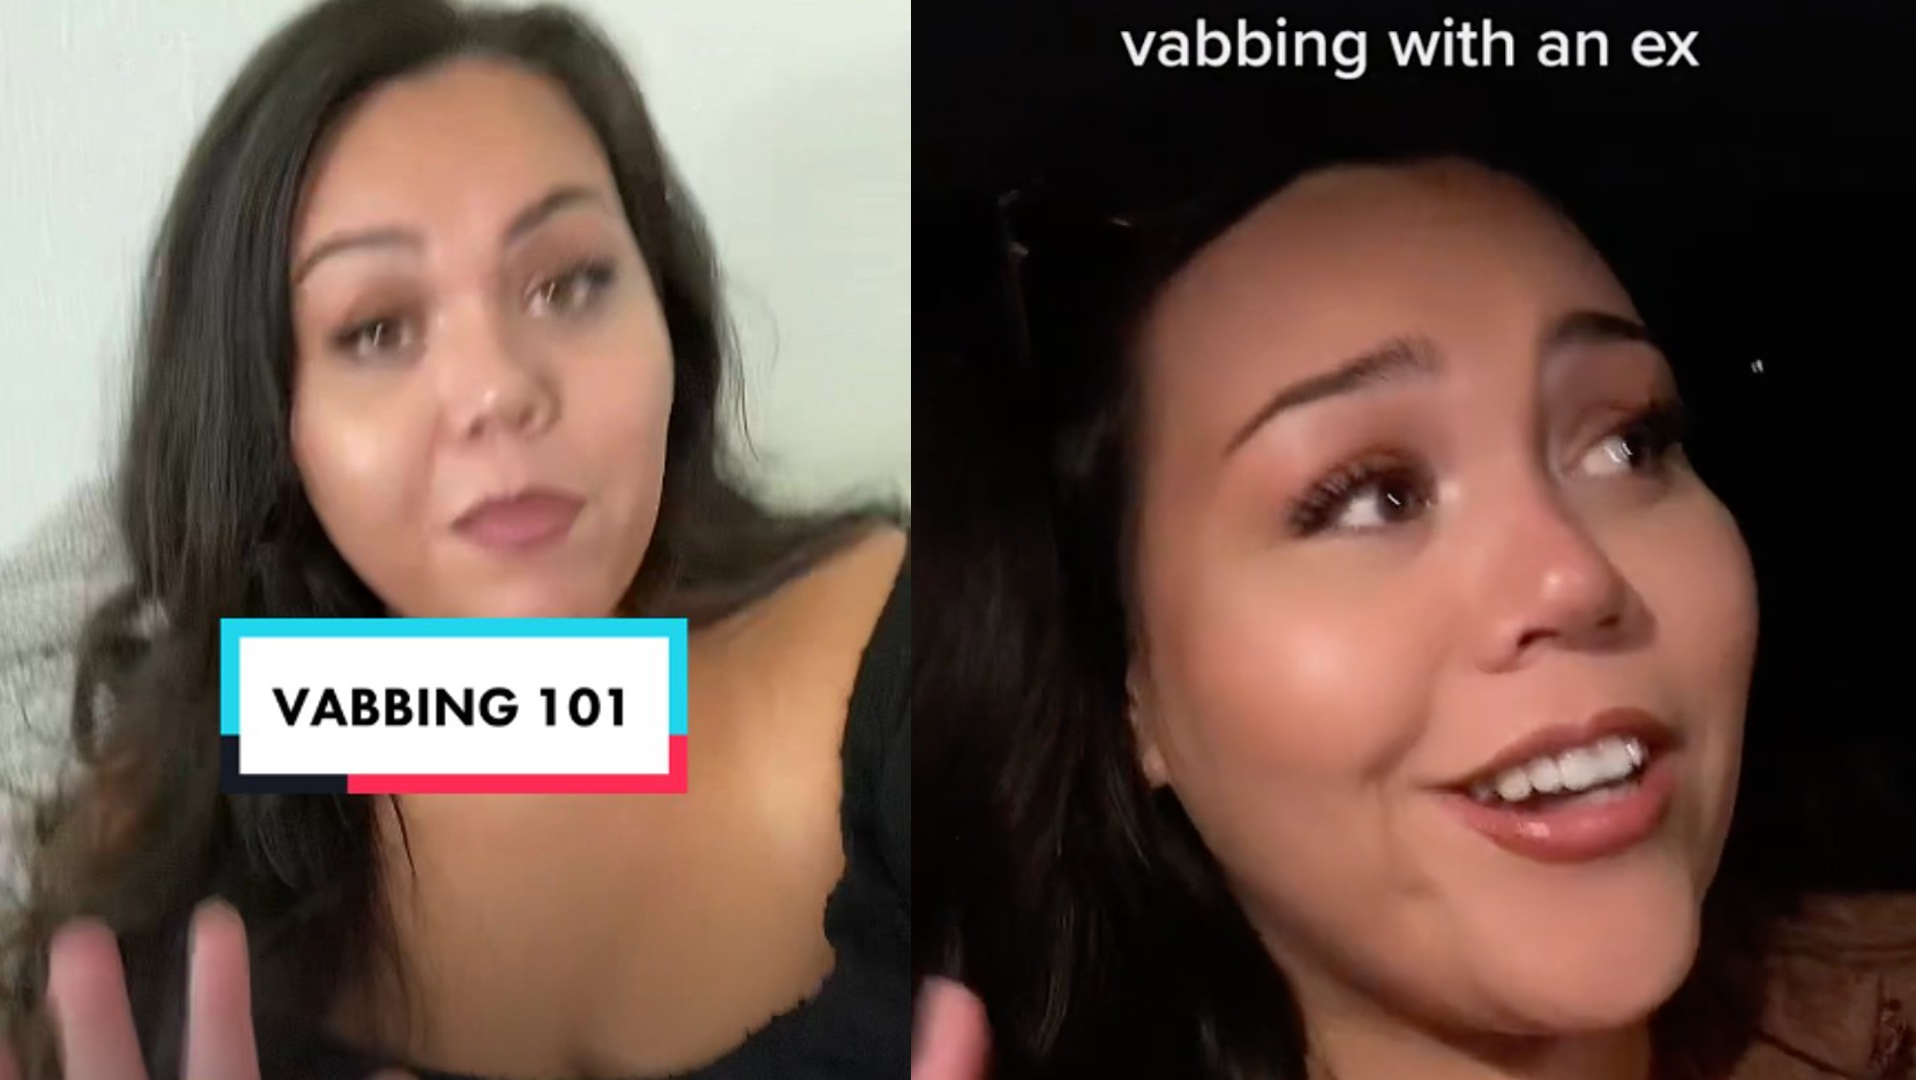 ashlee bohac recommends vabbing at the gym for the first time pic